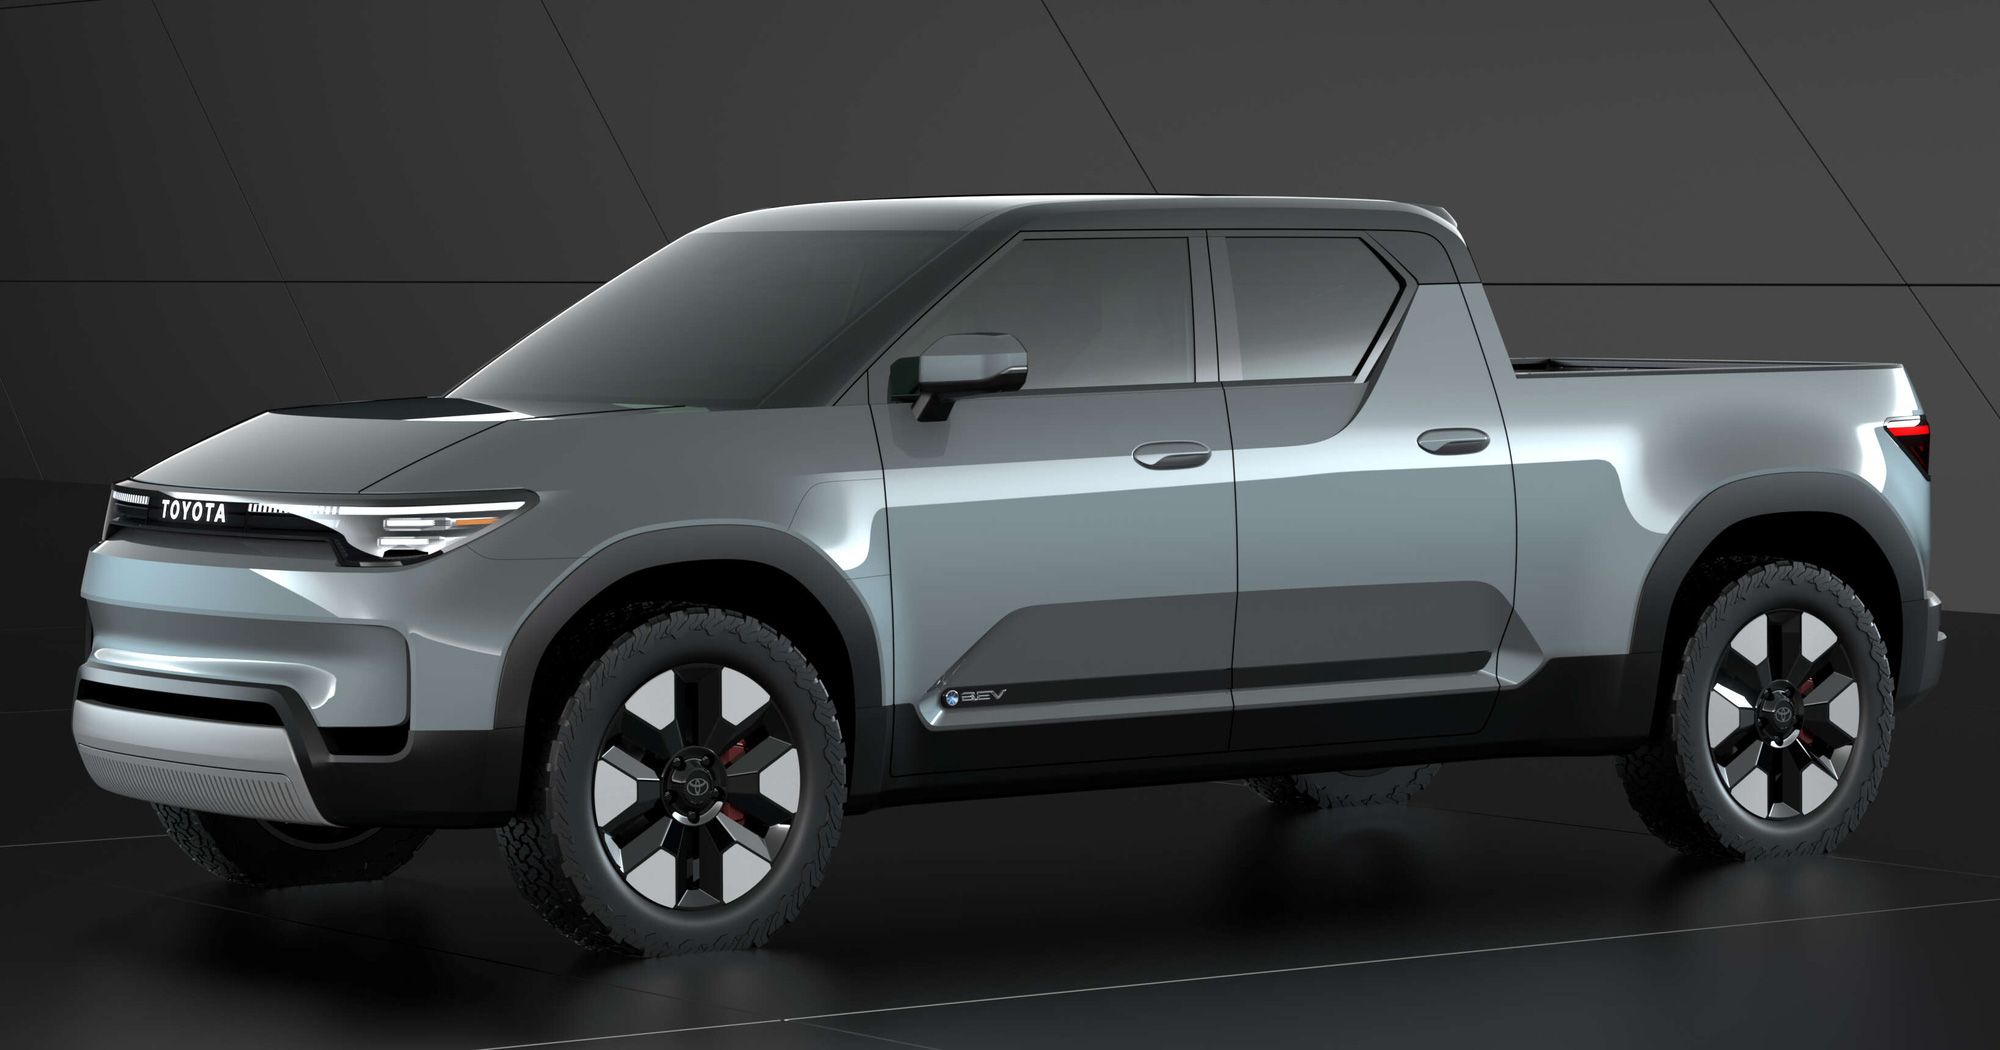 Toyota announced an electric pickup truck, but it's still not sure if it will go into production - Photo 4.